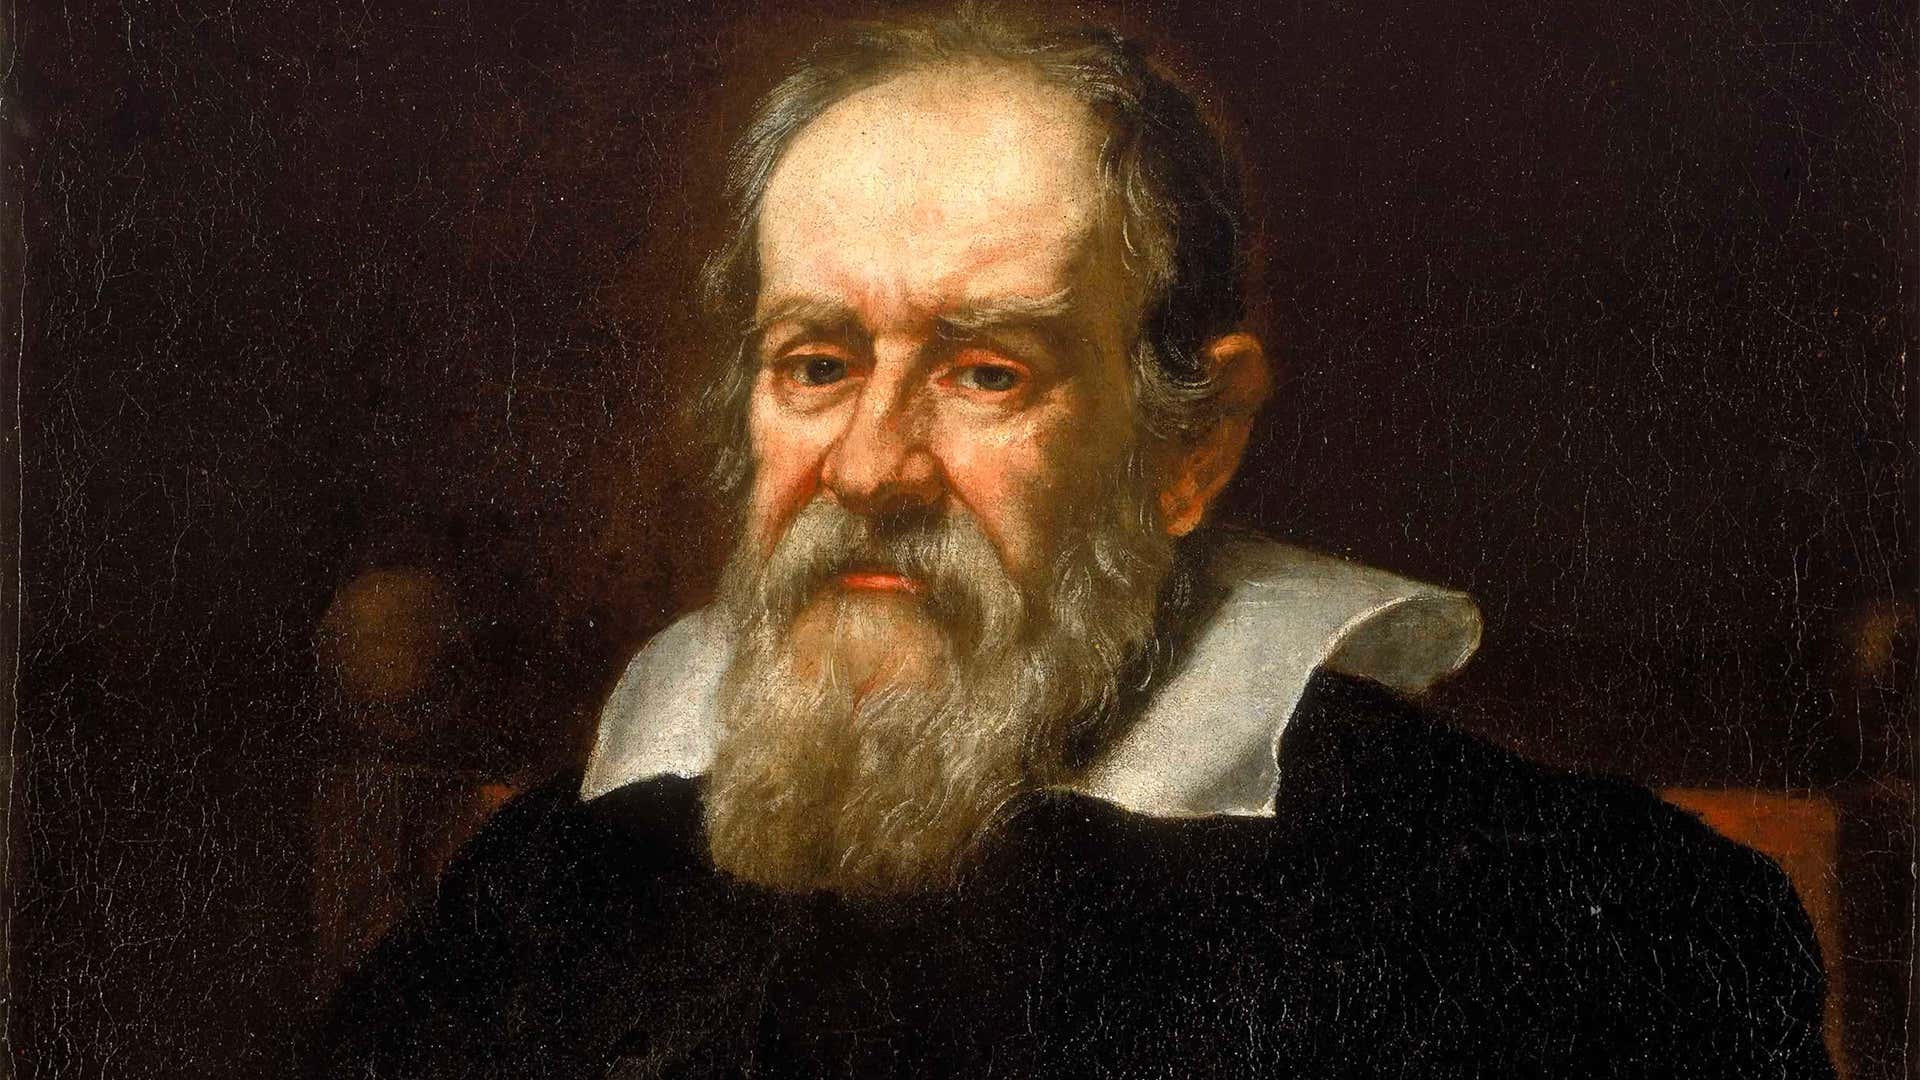 Only Extremely Legit History Buffs Can Identify These 50 Legendary People Galileo Galilei